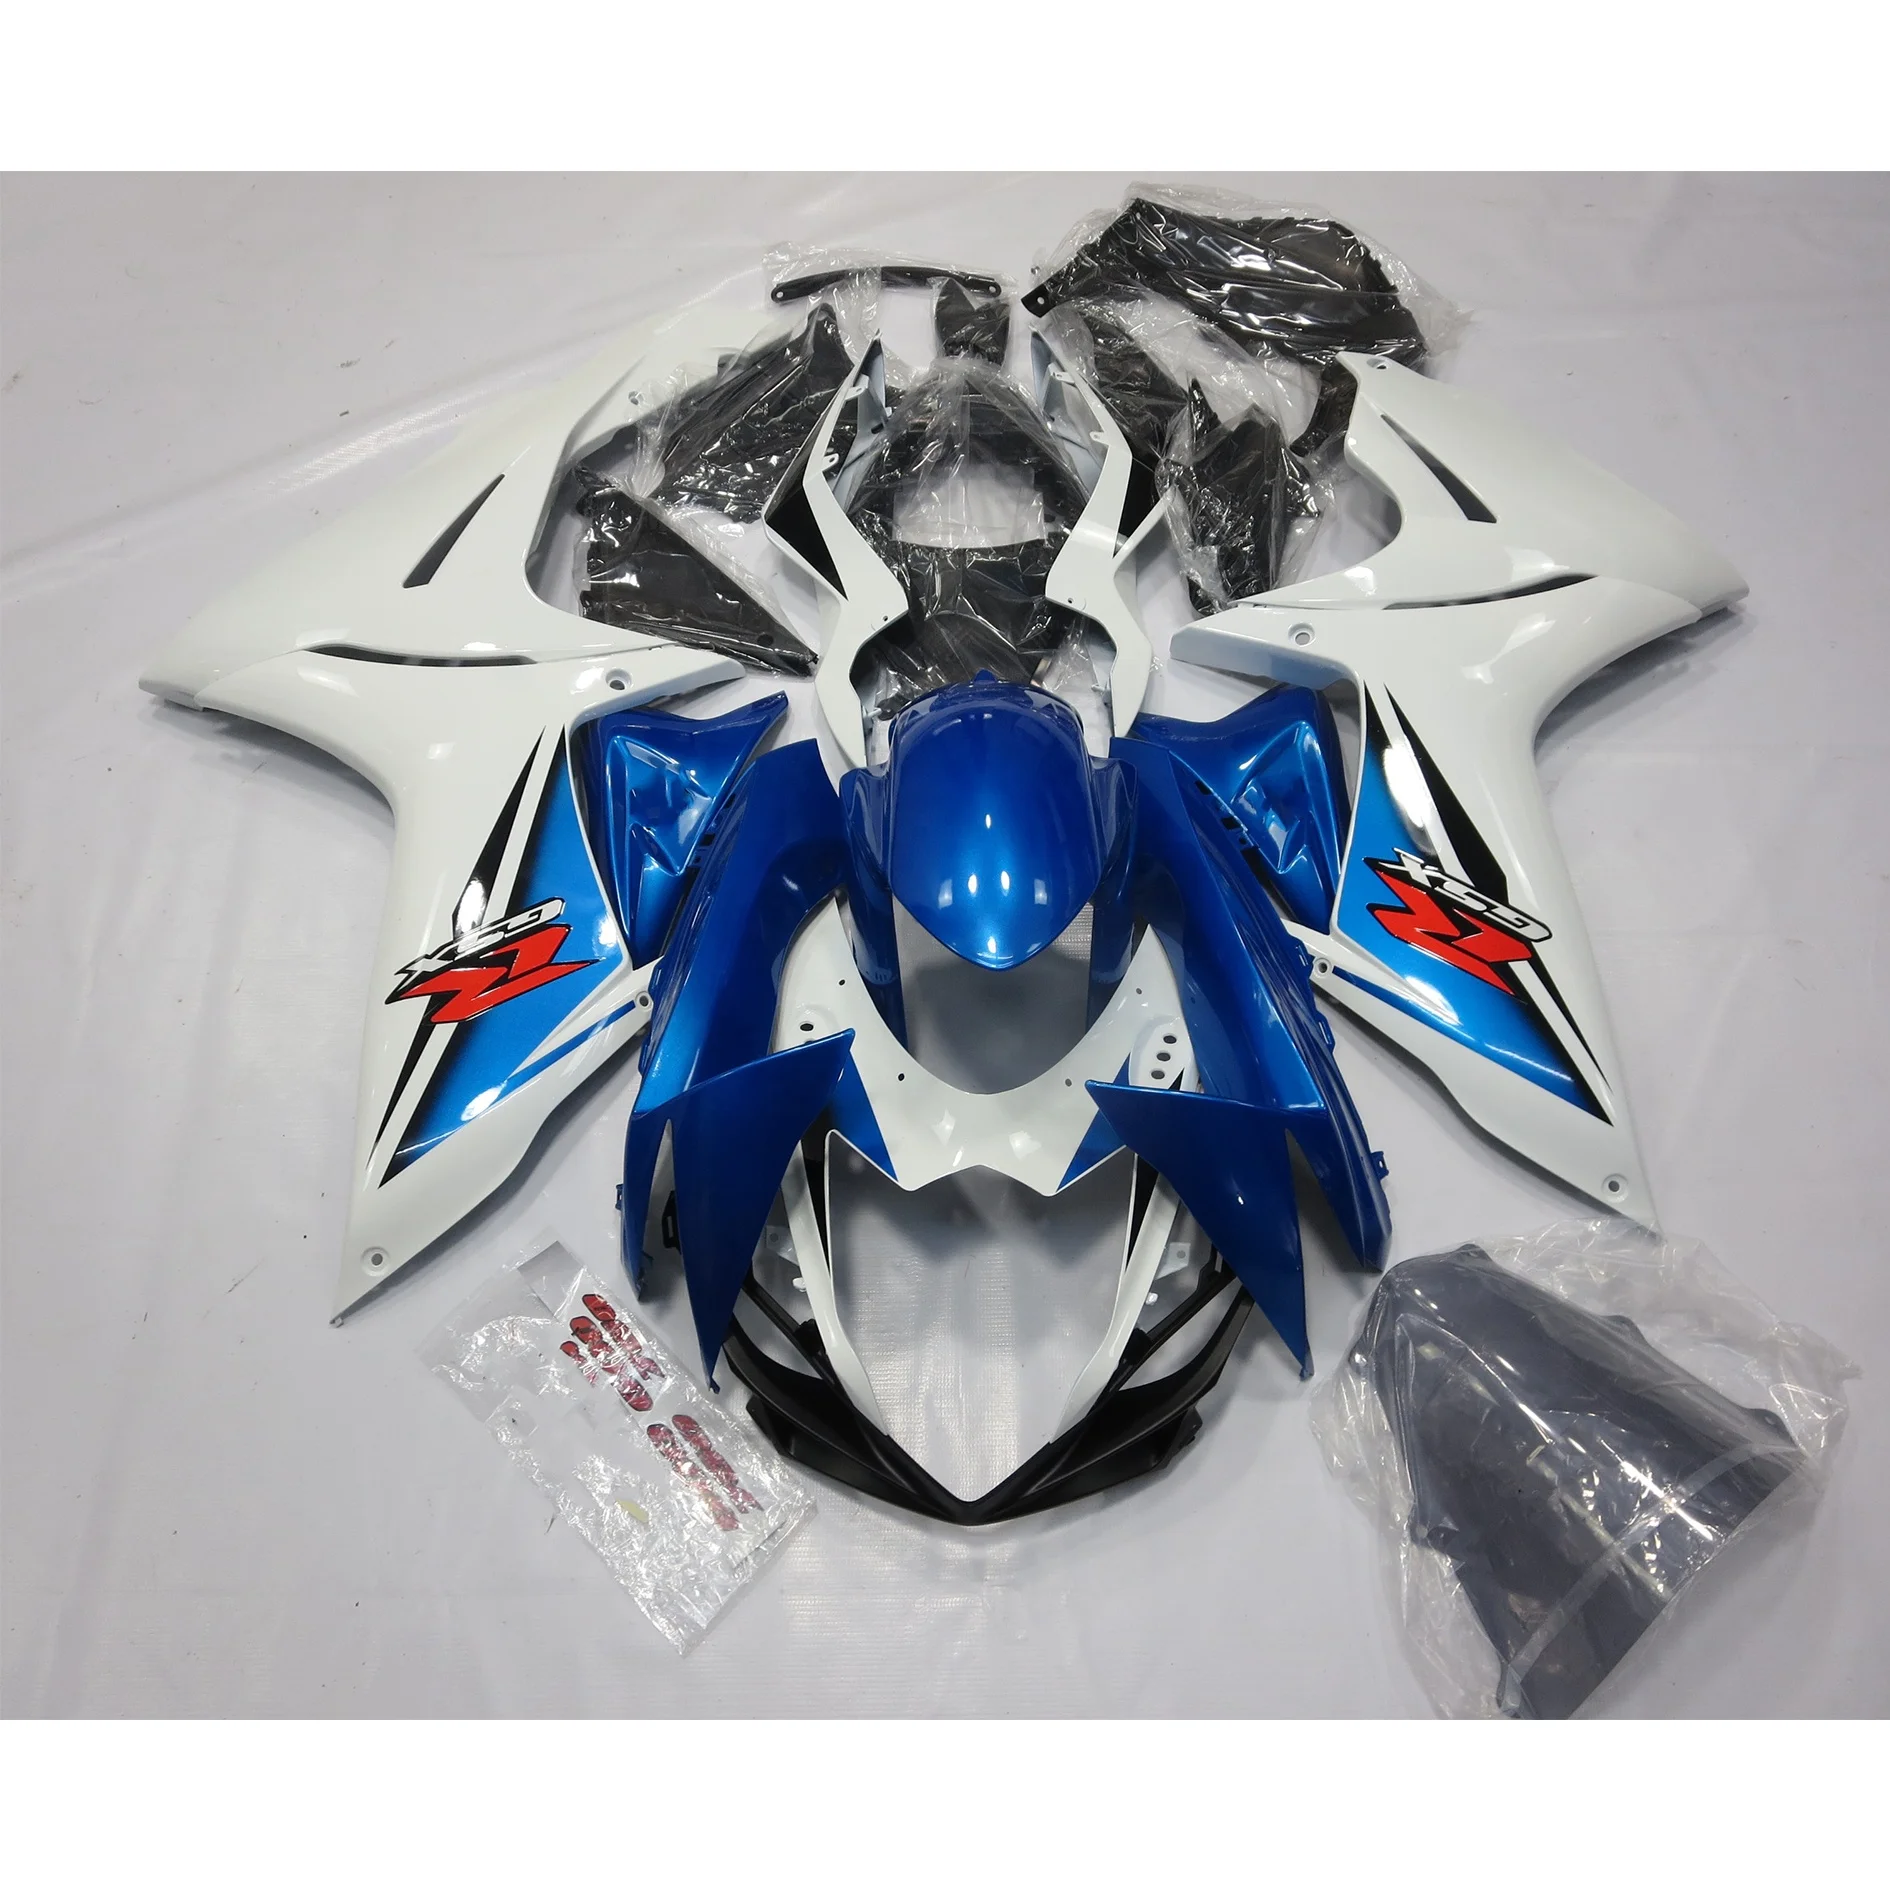 

2022 WHSC Blue Black White Motorcycle Accessories For SUZUKI GSXR600-750 2011-2016 K11 Motorcycle Body Systems Fairing Kits, Pictures shown